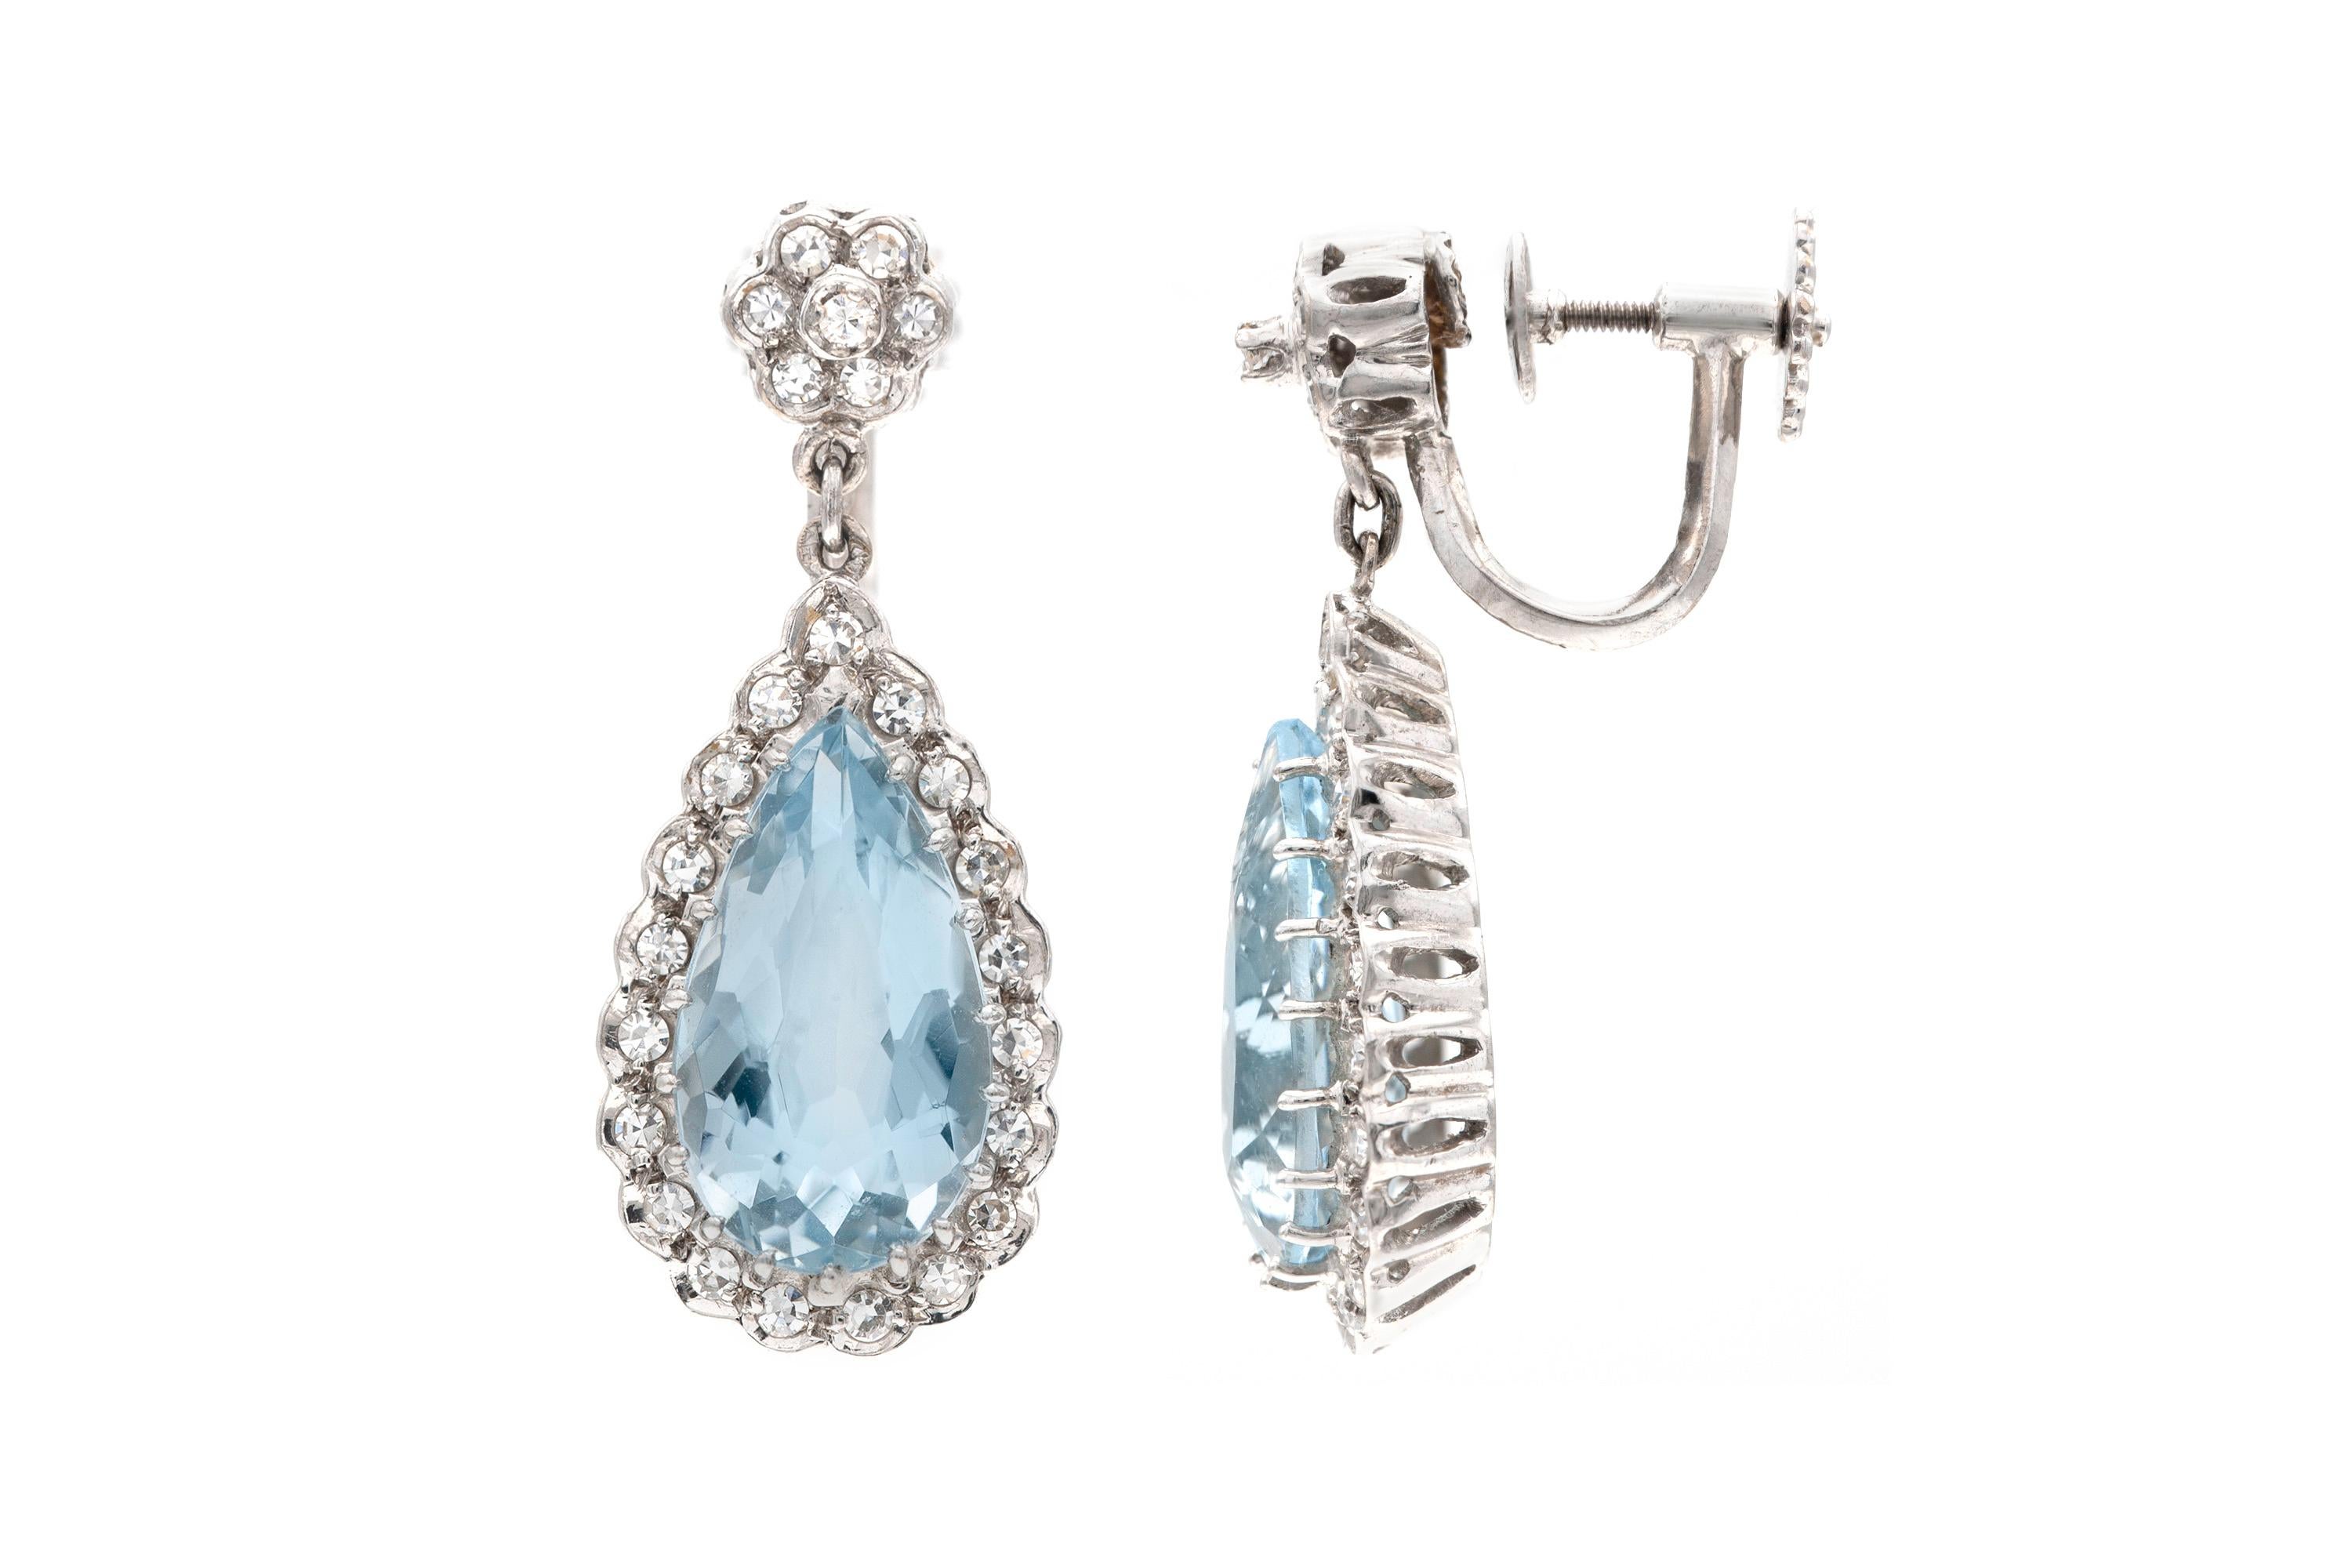 Finely crafted in 14K white gold with two pear-shaped Aquamarines weighing approximately a total of 10.00 carats.
The earrings feature diamonds weighing approximately a total of 2.00 carats.